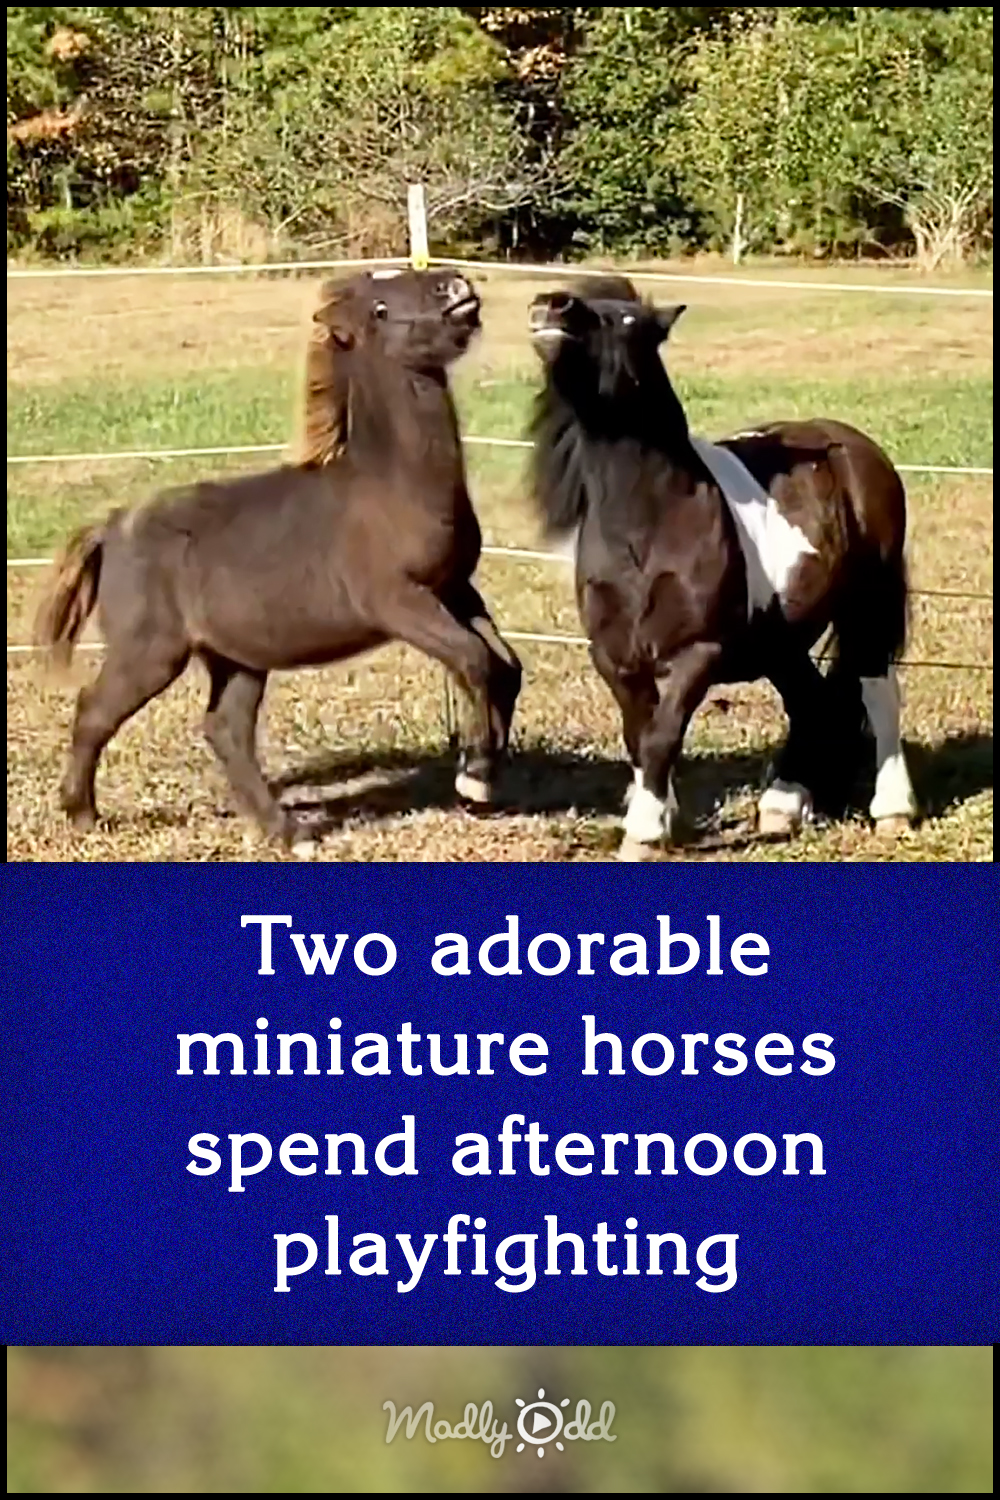 Two adorable miniature horses spend afternoon playfighting